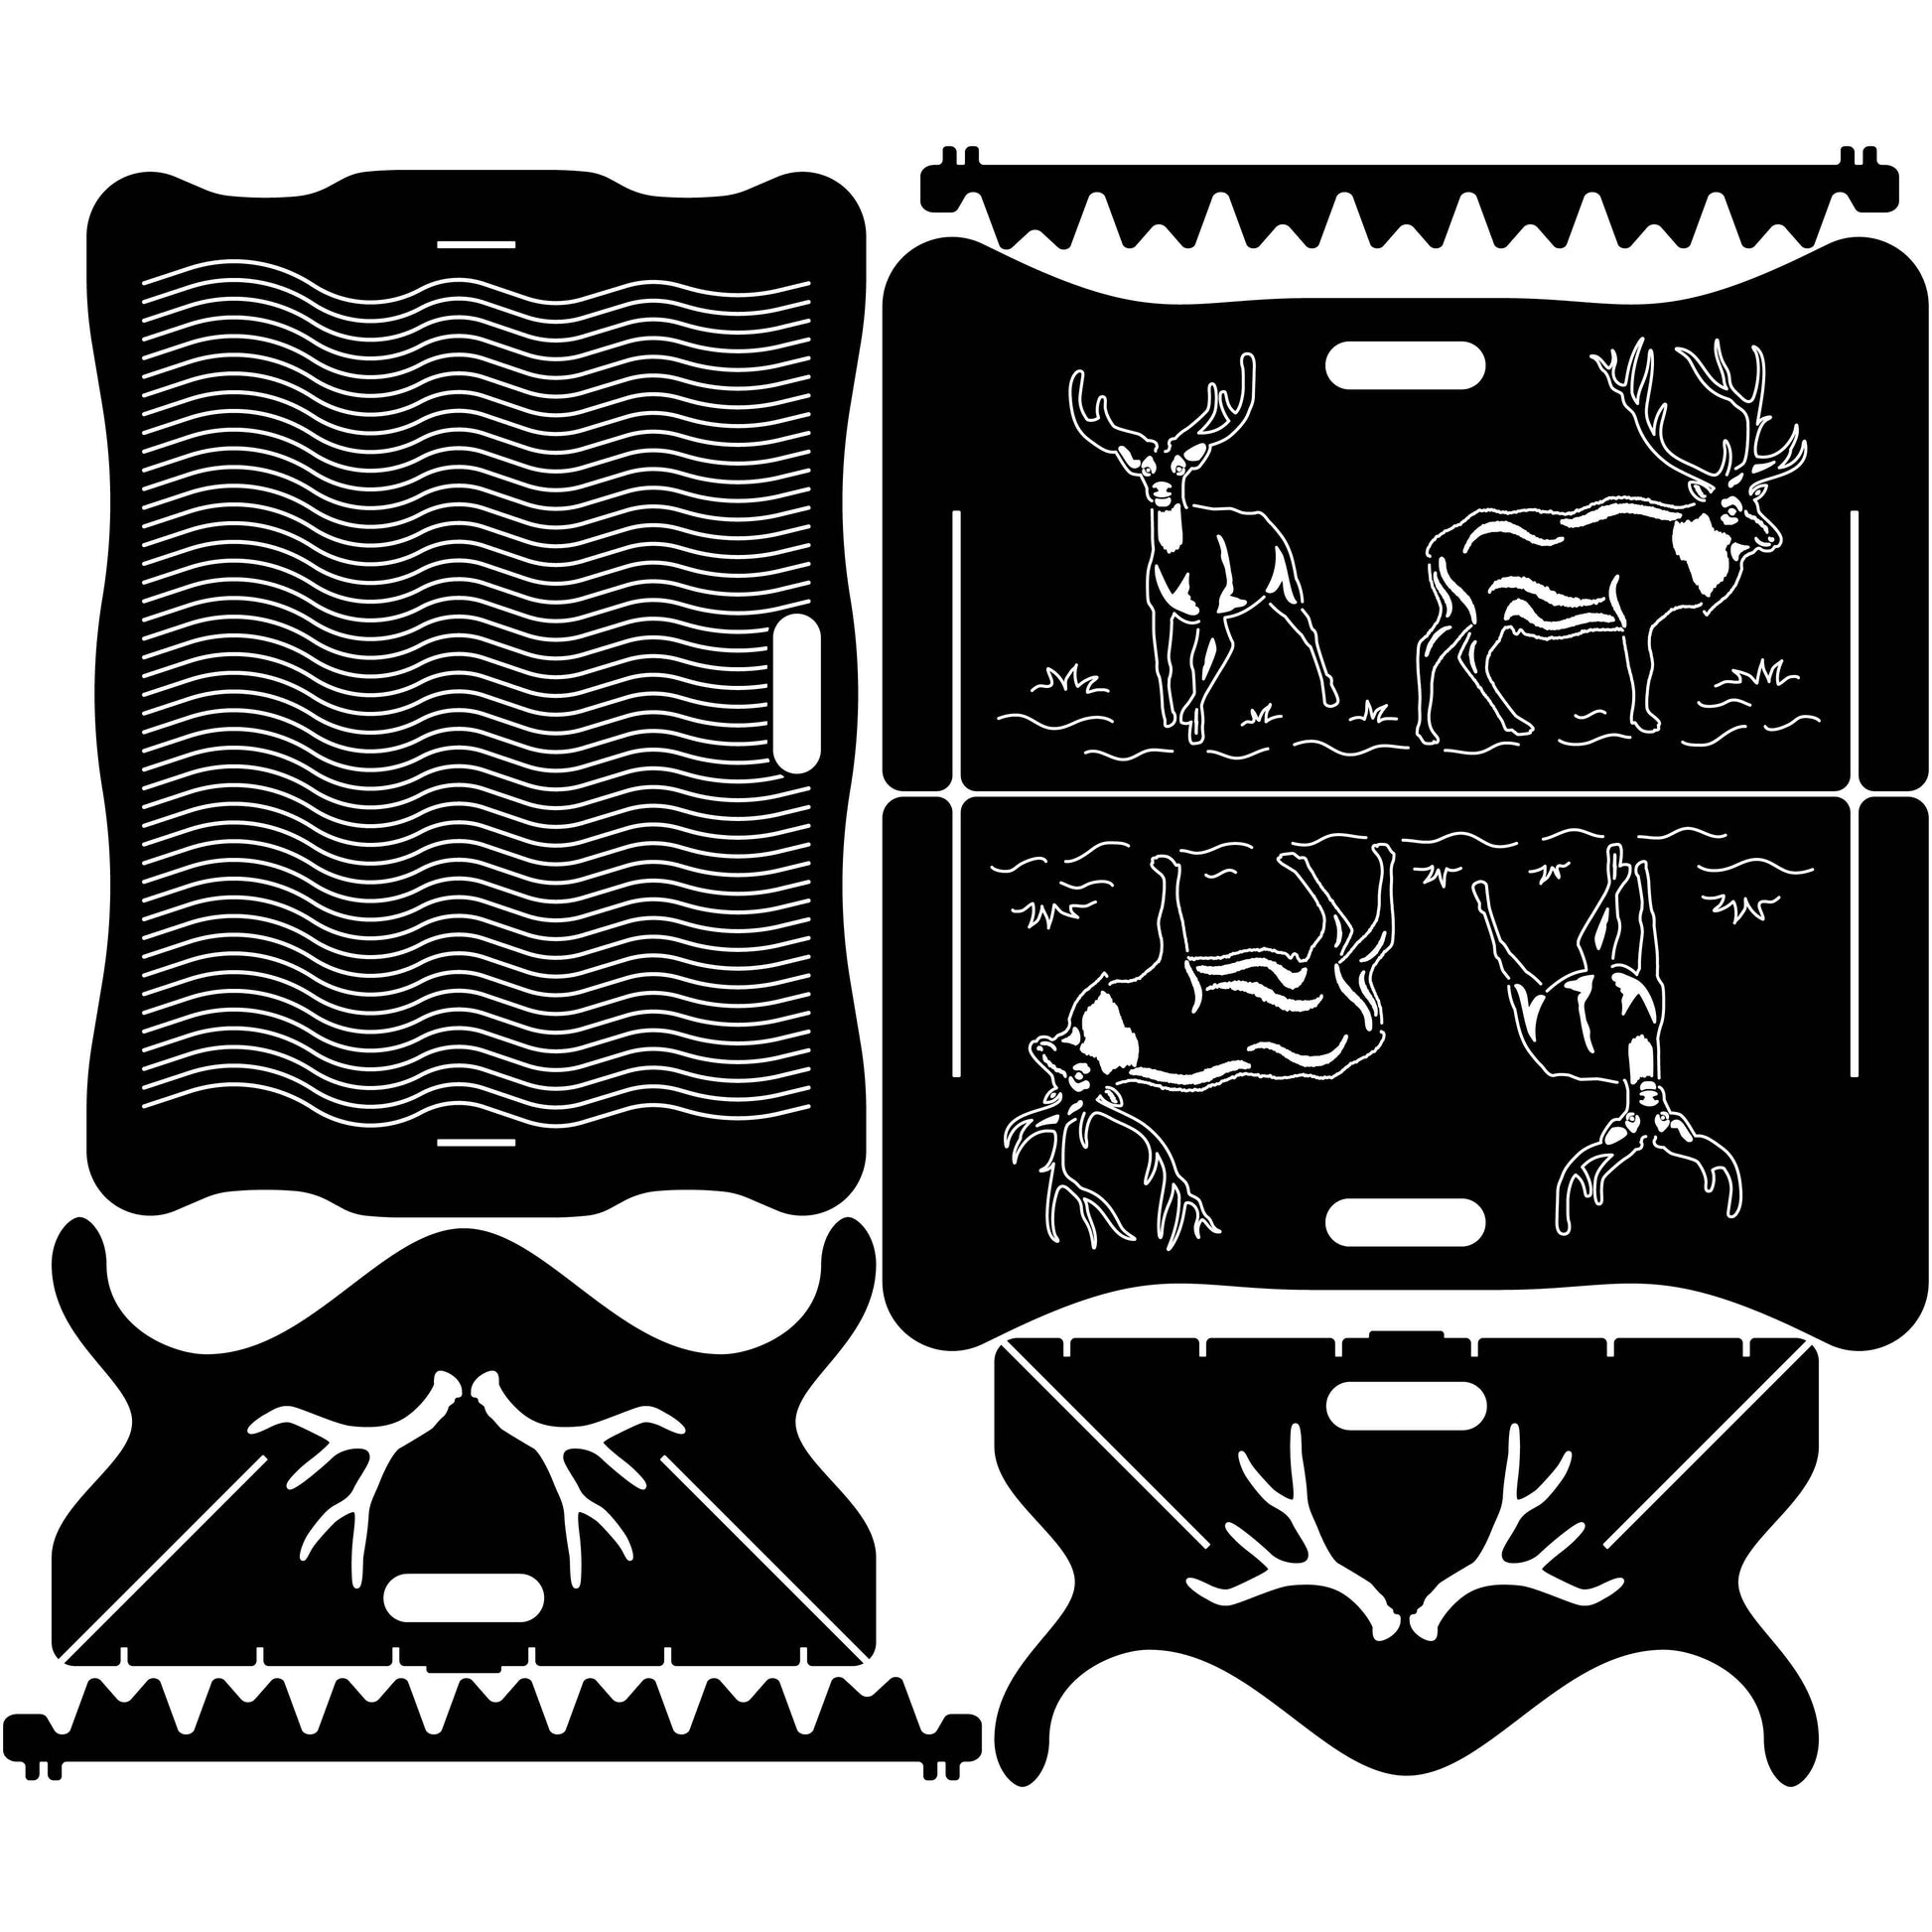 Fire Pit Collapsible Deers Scene-dxf files cut ready for cnc